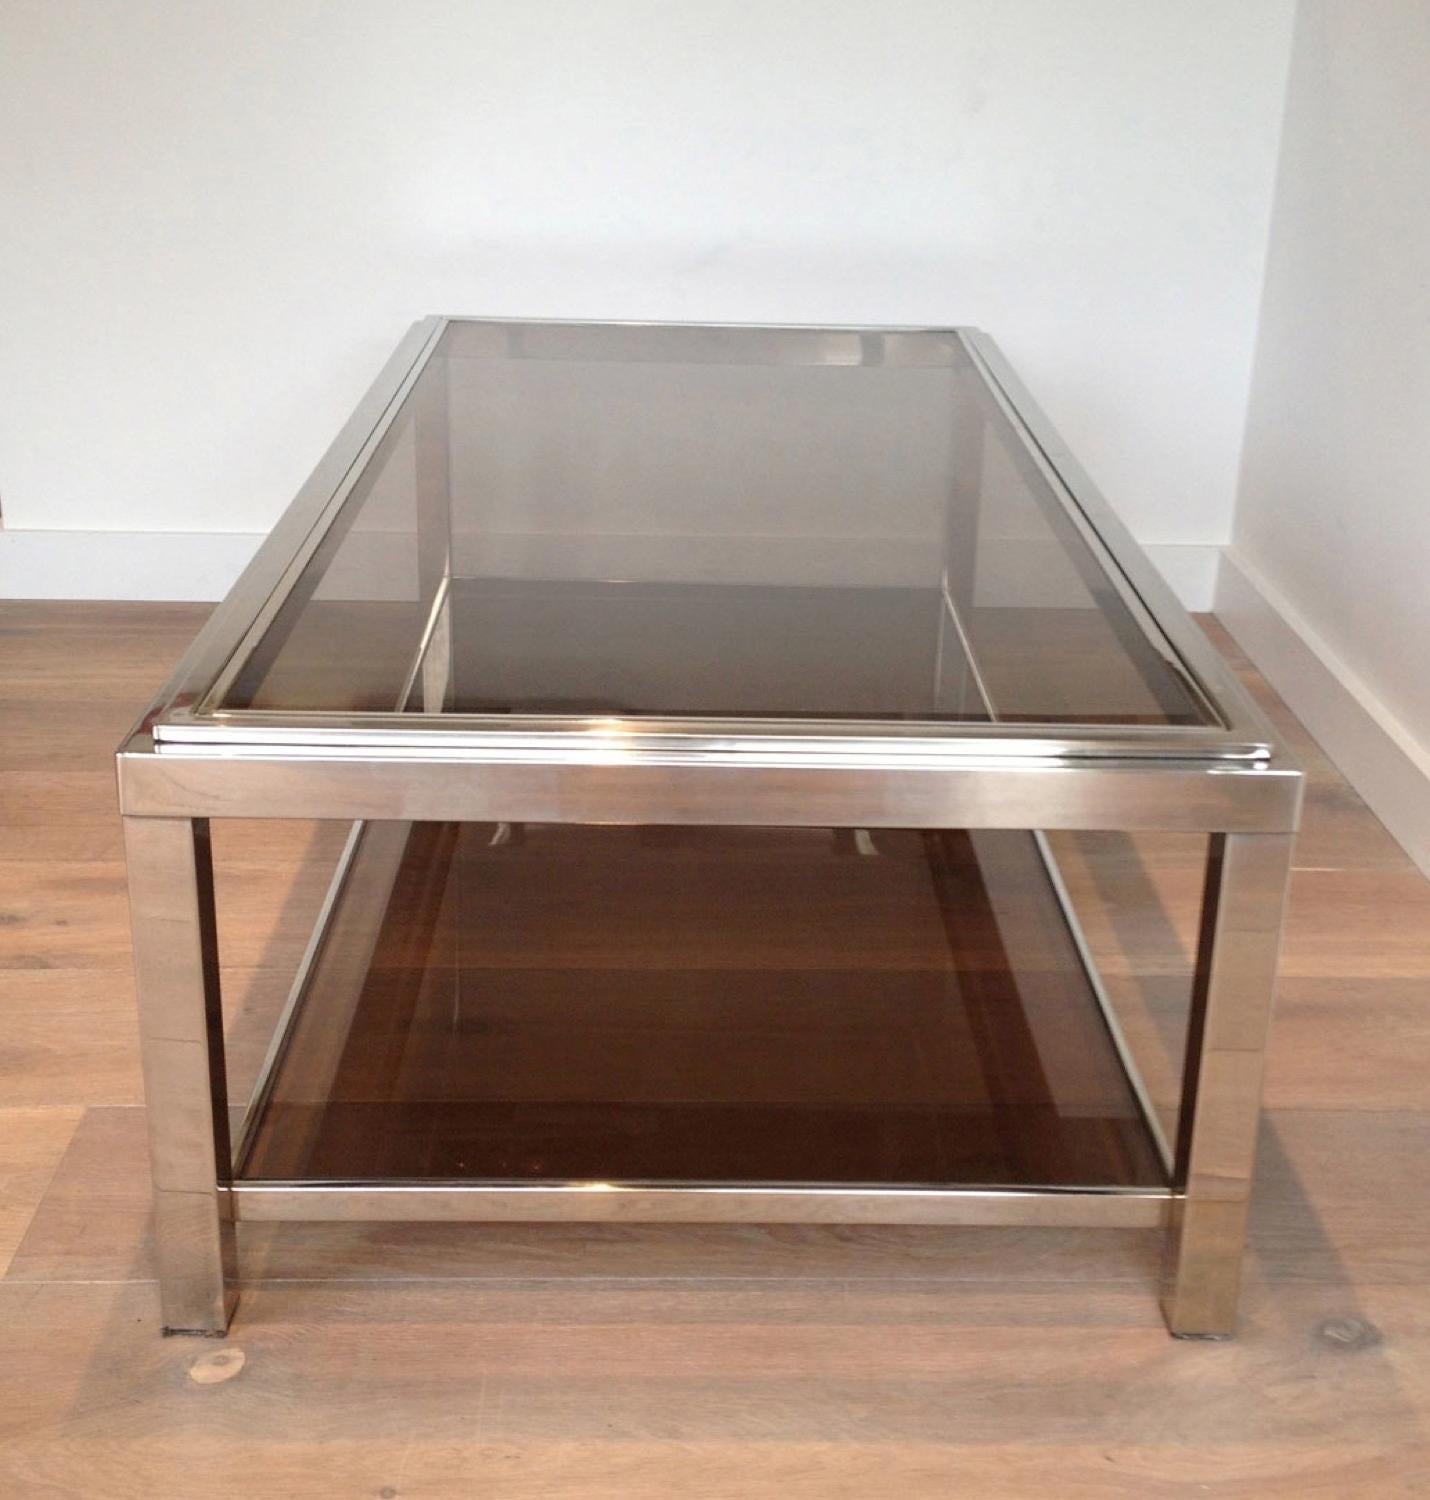 Rectangular Chromed Coffee Table In Good Condition For Sale In Marcq-en-Barœul, Hauts-de-France